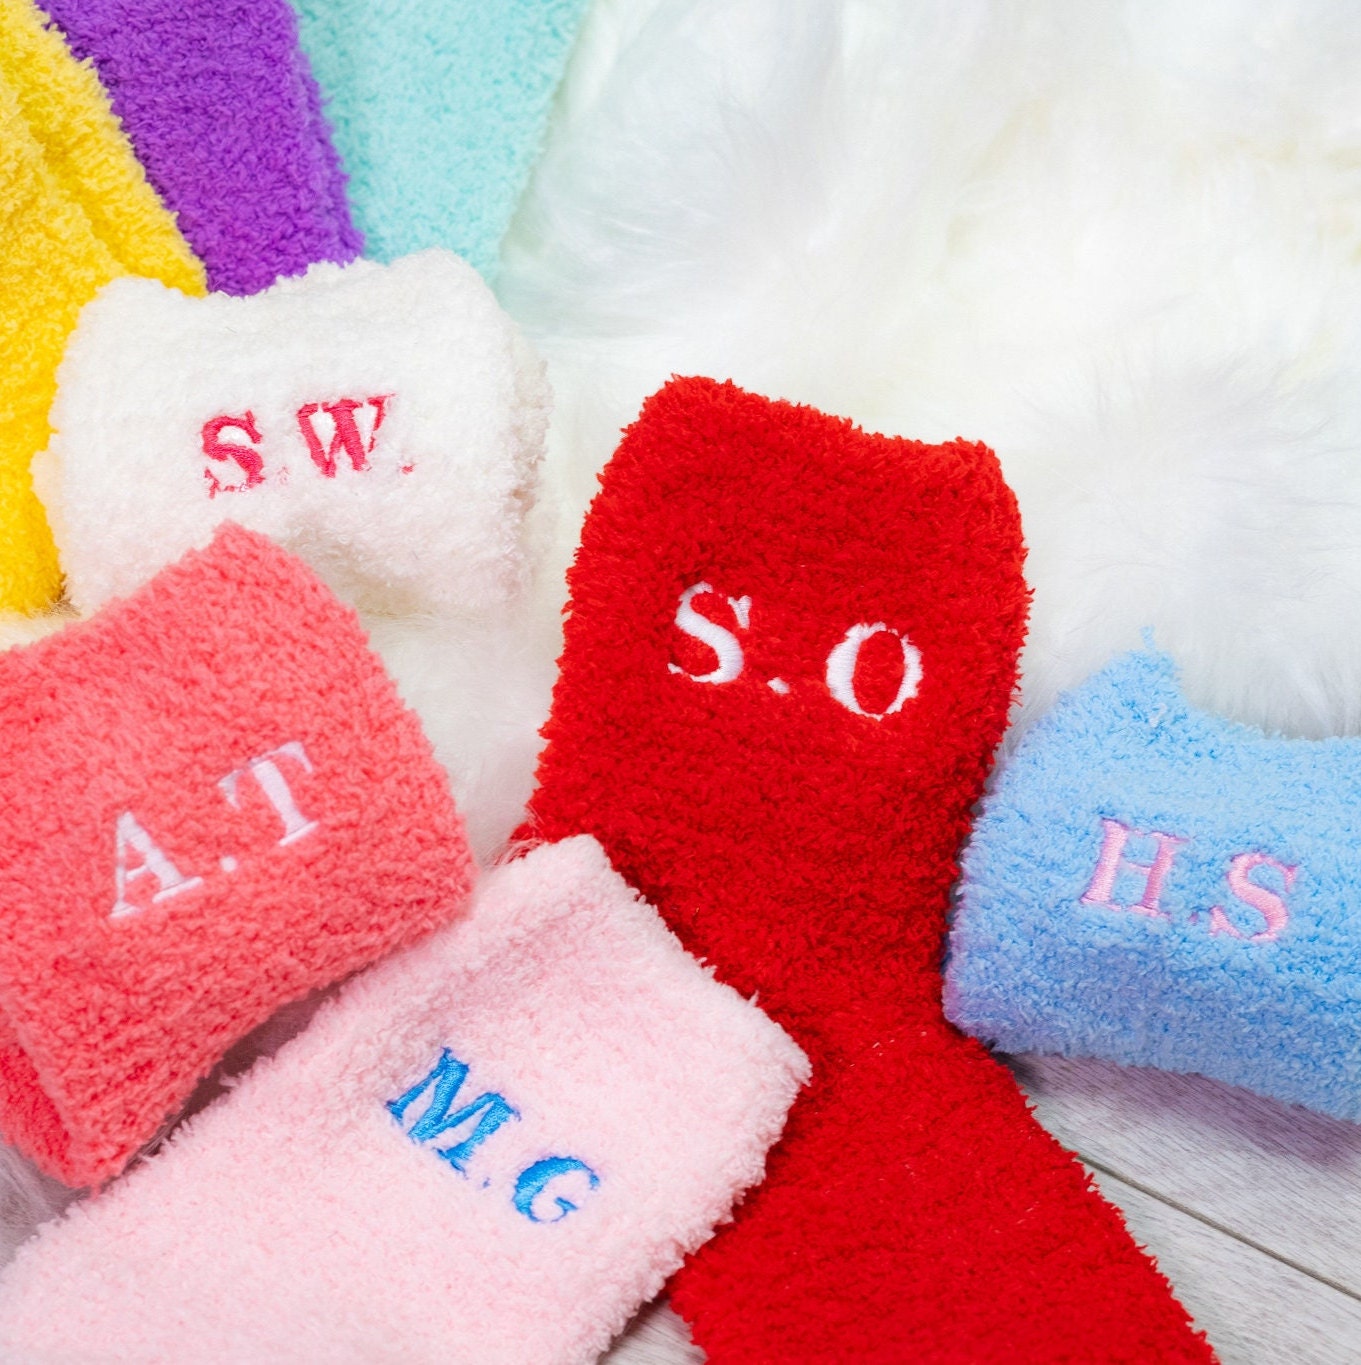 Custom Embroidered Initials Socks - Warm Fuzzy Fluffy Unisex Sock UK Personalised Happy Personalized Gift Idea For Him & Her